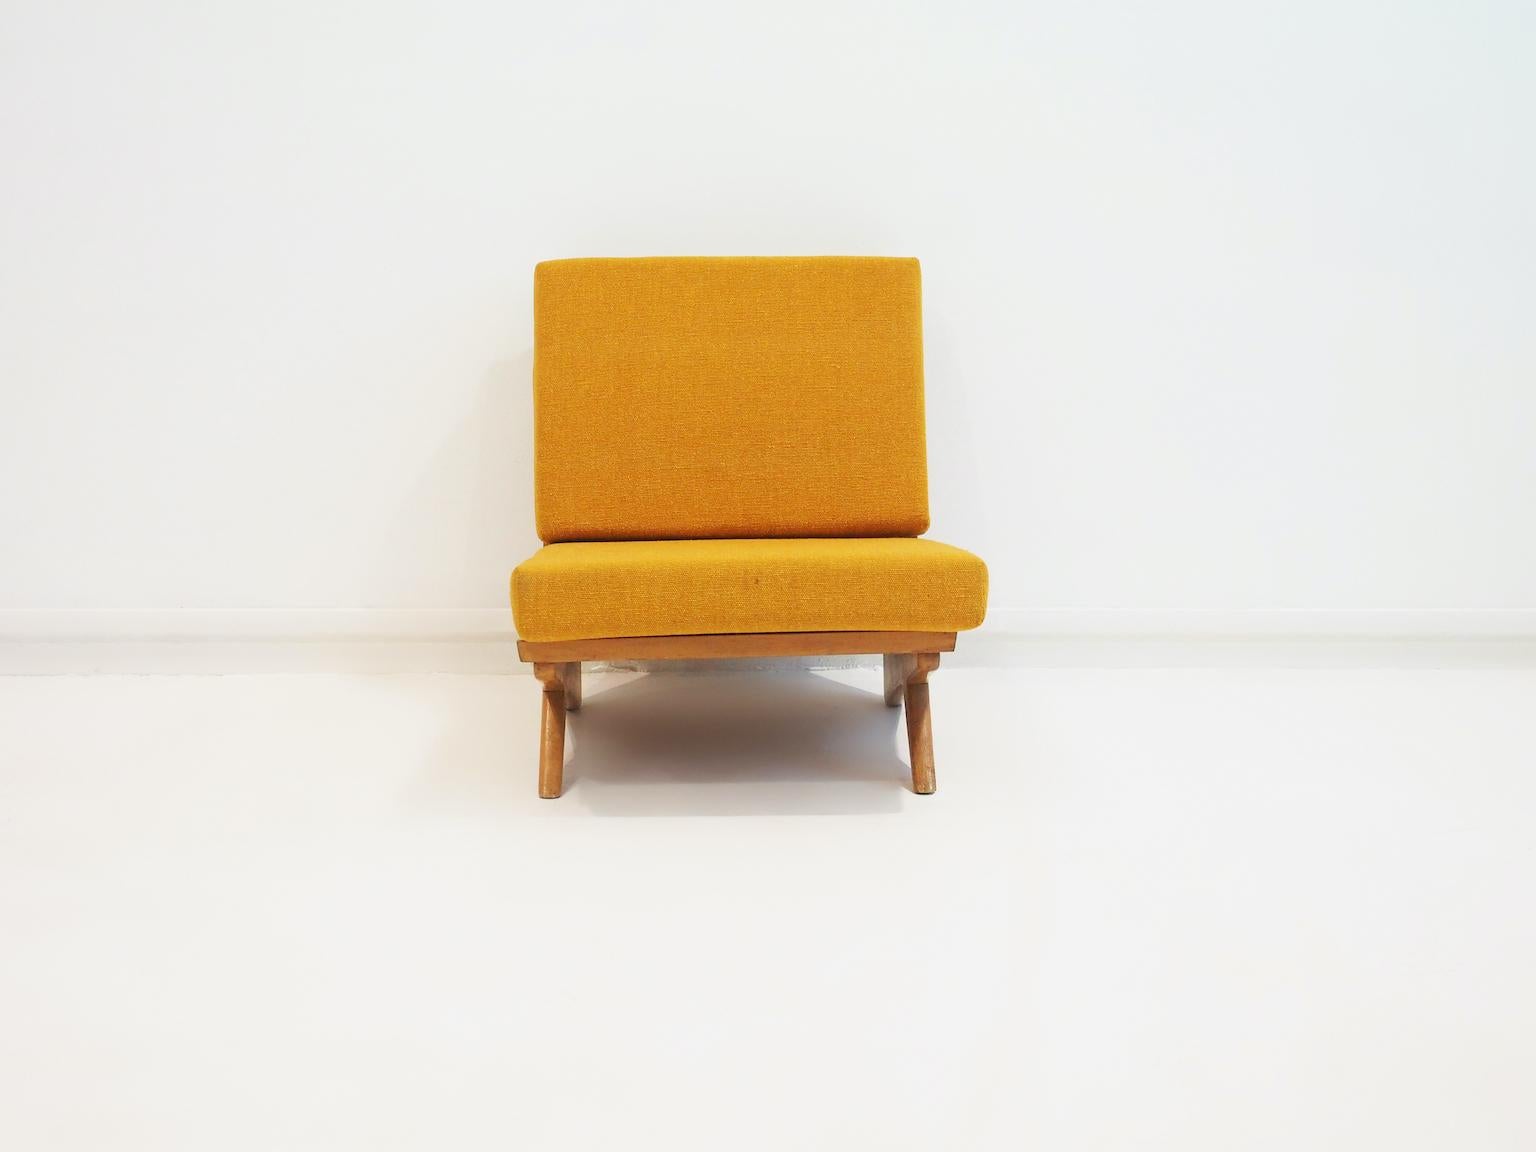 Minimalist Danish lounge chair with beech wood frame designed by Georg Thams in the 1970s. Loose seat and back cushions covered with yellow/mustard colored wool fabric.